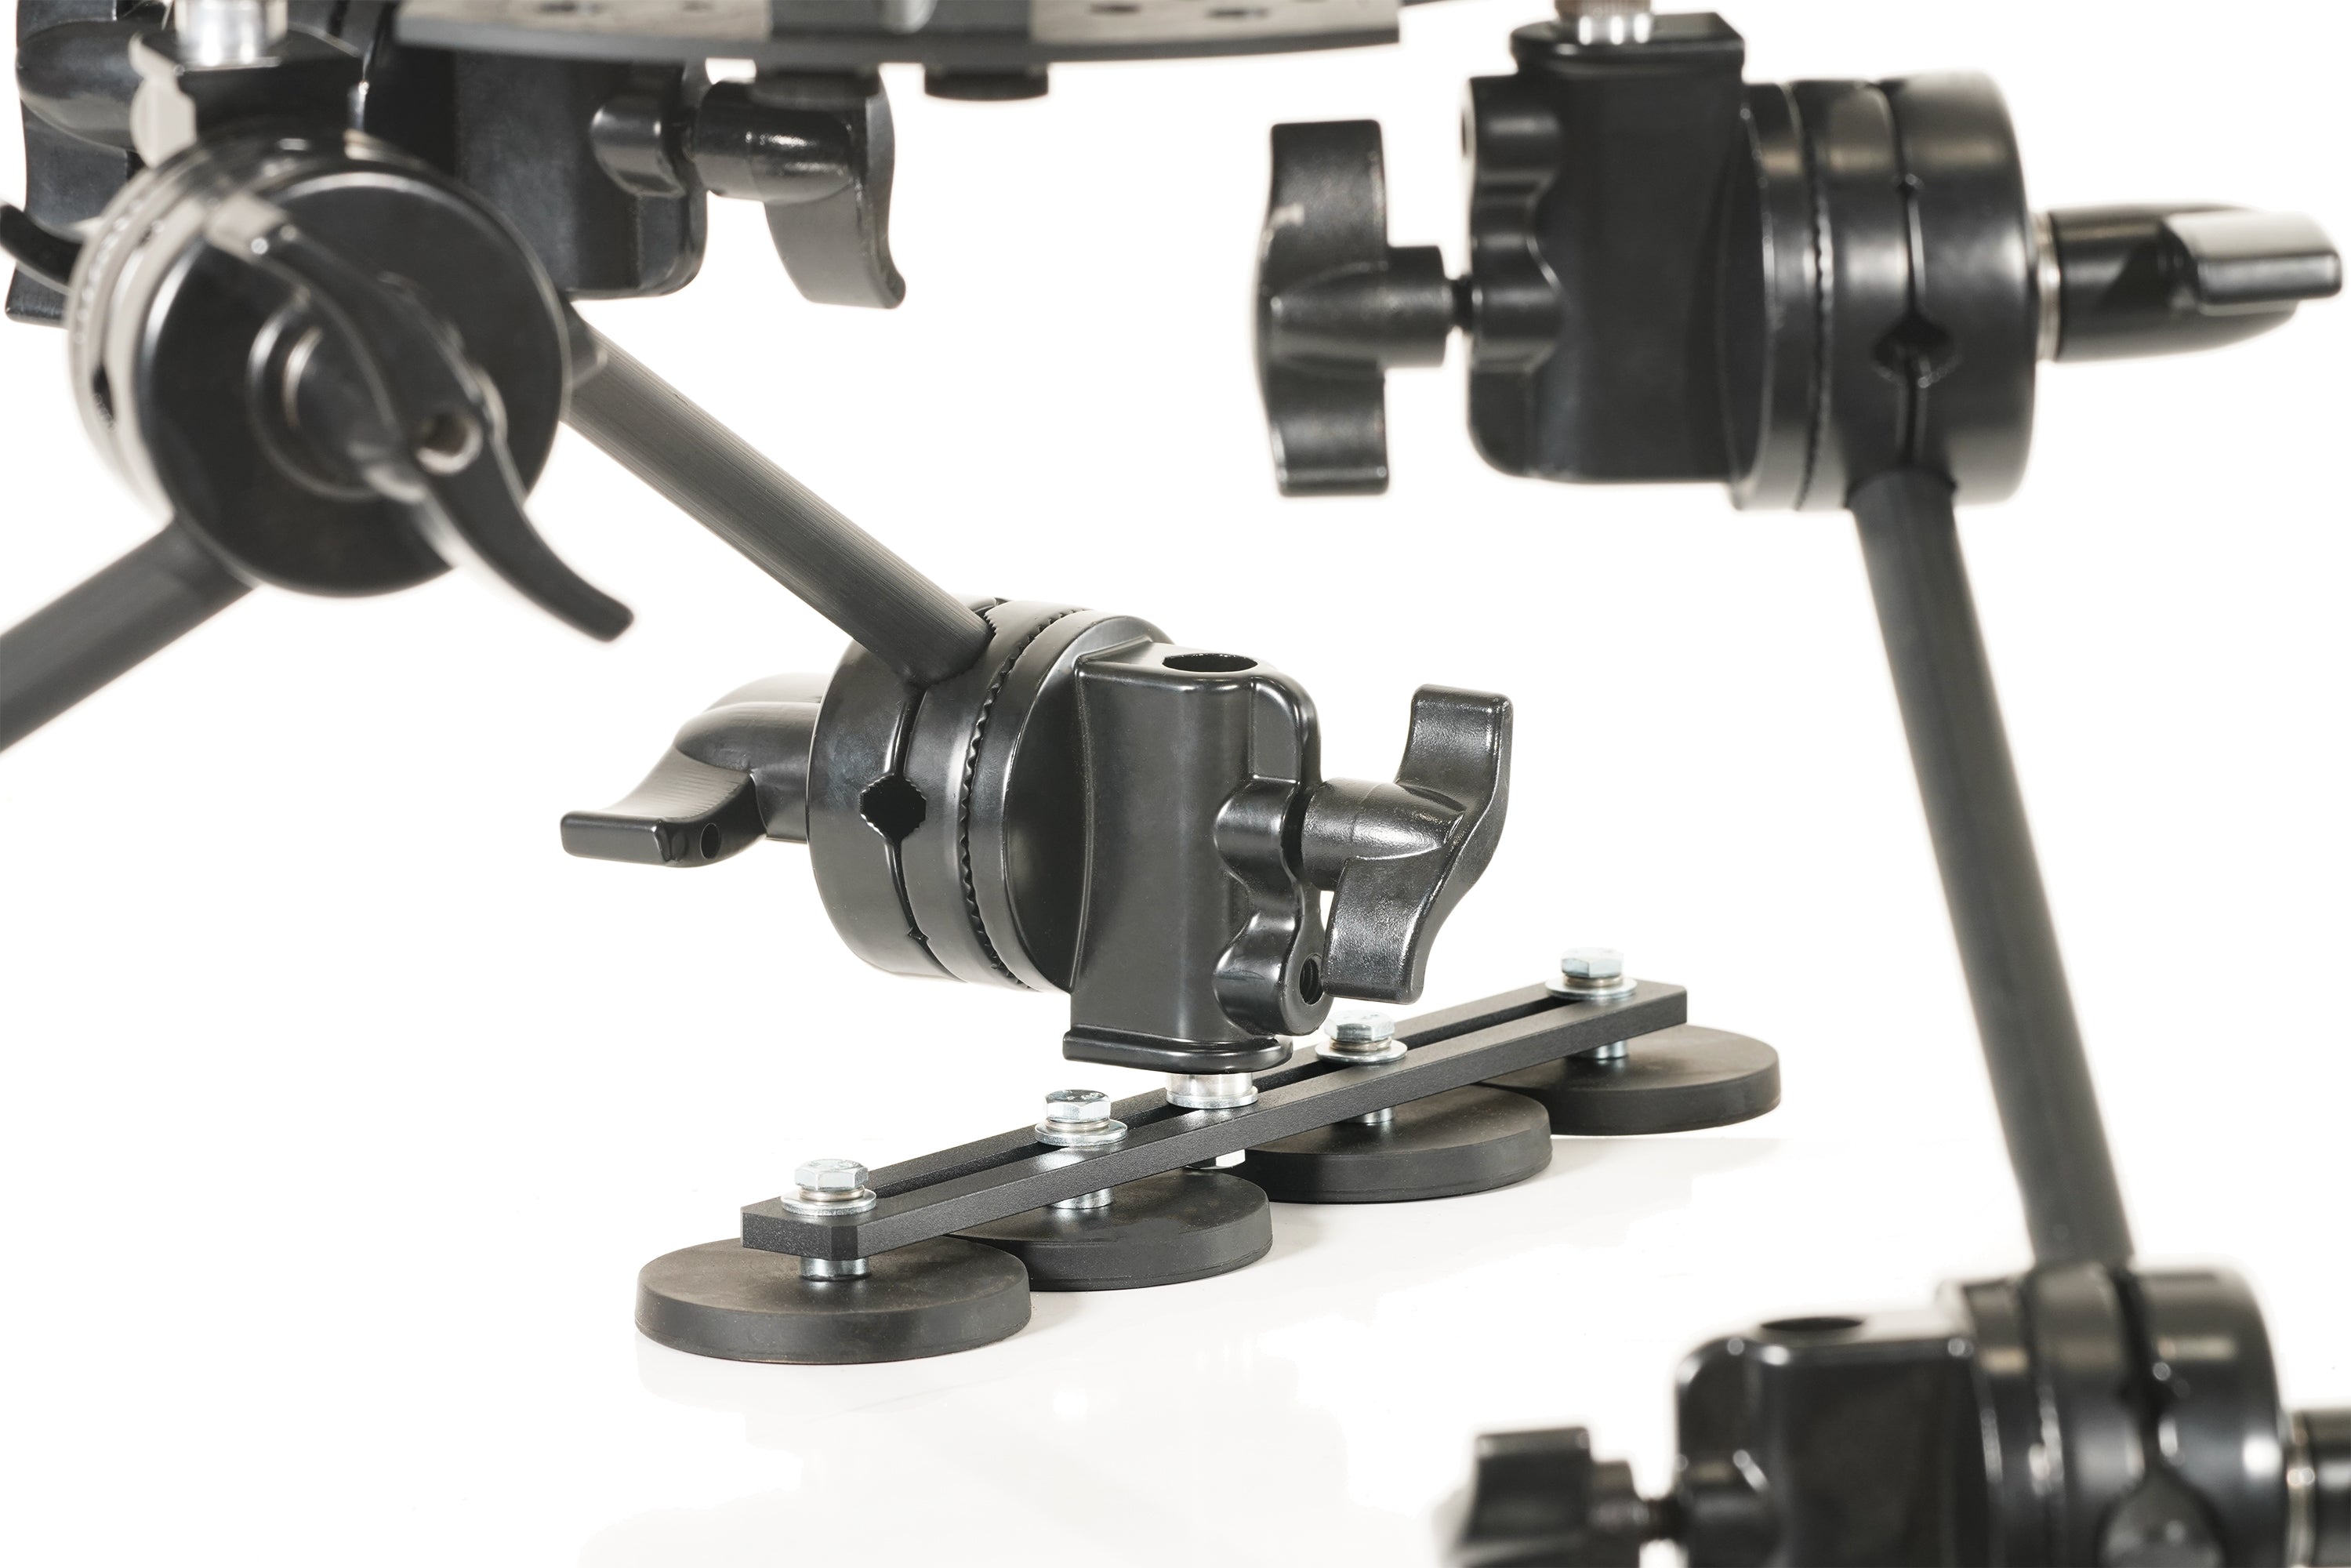 Modus Camera Mounting System V - 2 Platforms with Wire Sets, 3 Magnet Arms and 4 Wheel Sets